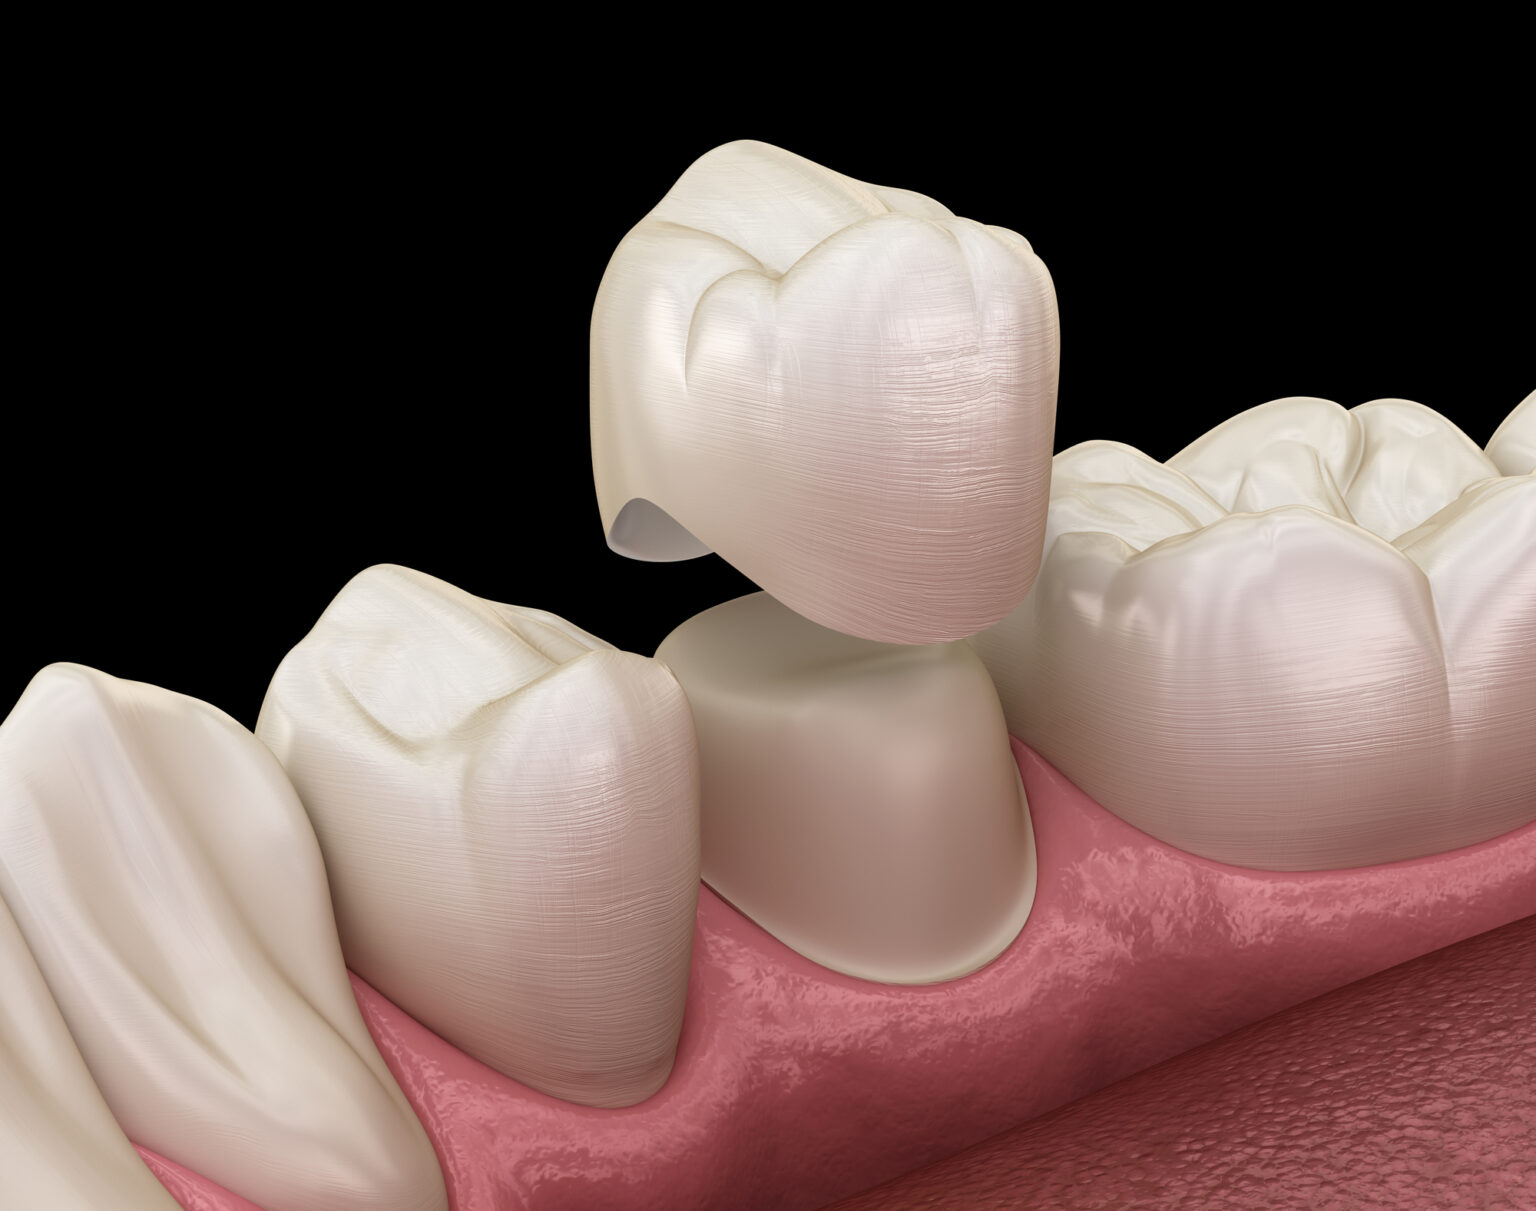 3d illustration of an affordable Dallas dentist placing a dental crown on a lower premolar tooth.